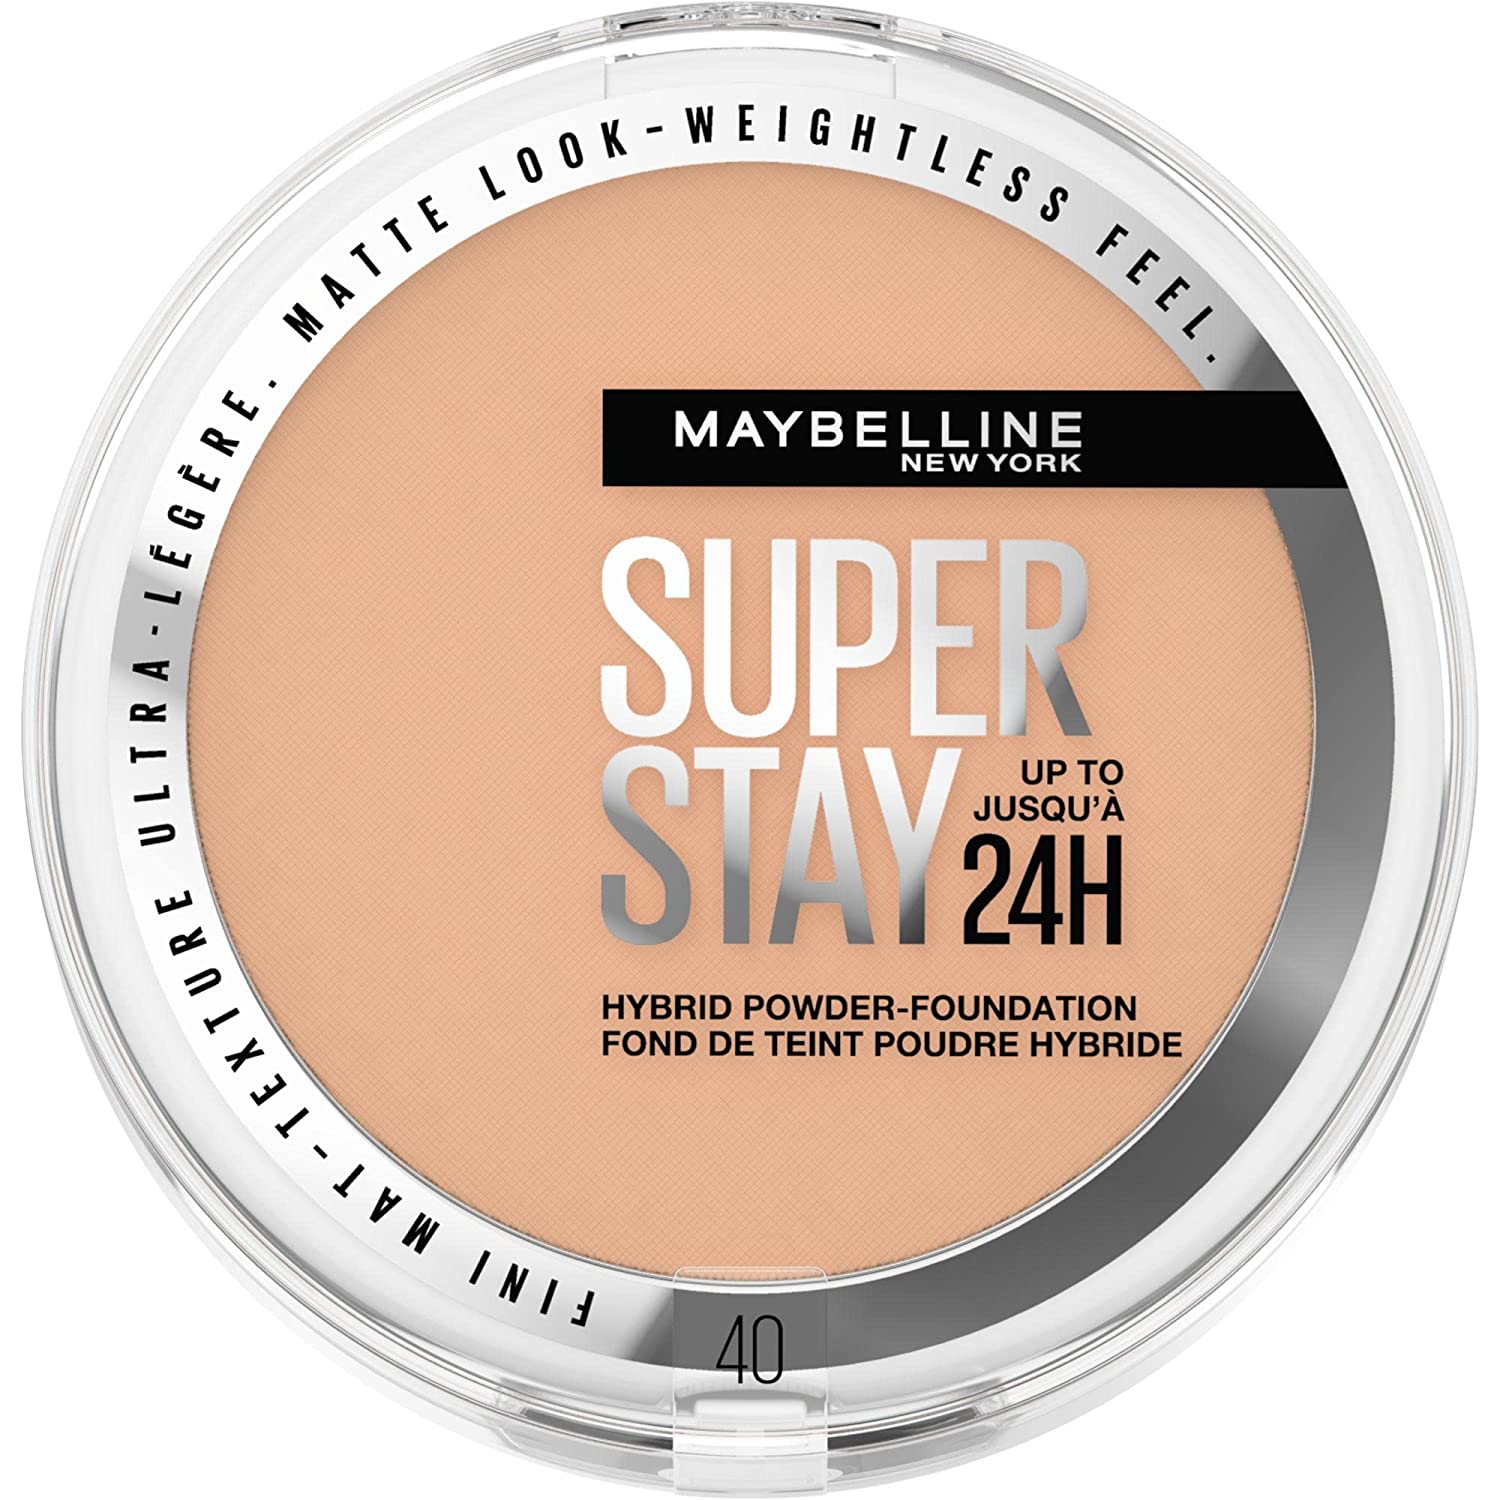 Maybelline New York Powder Make-Up, Waterproof and Matte with High Coverage, Super Stay Hybrid Powder Foundation, #40, 1 Piece, ‎no.